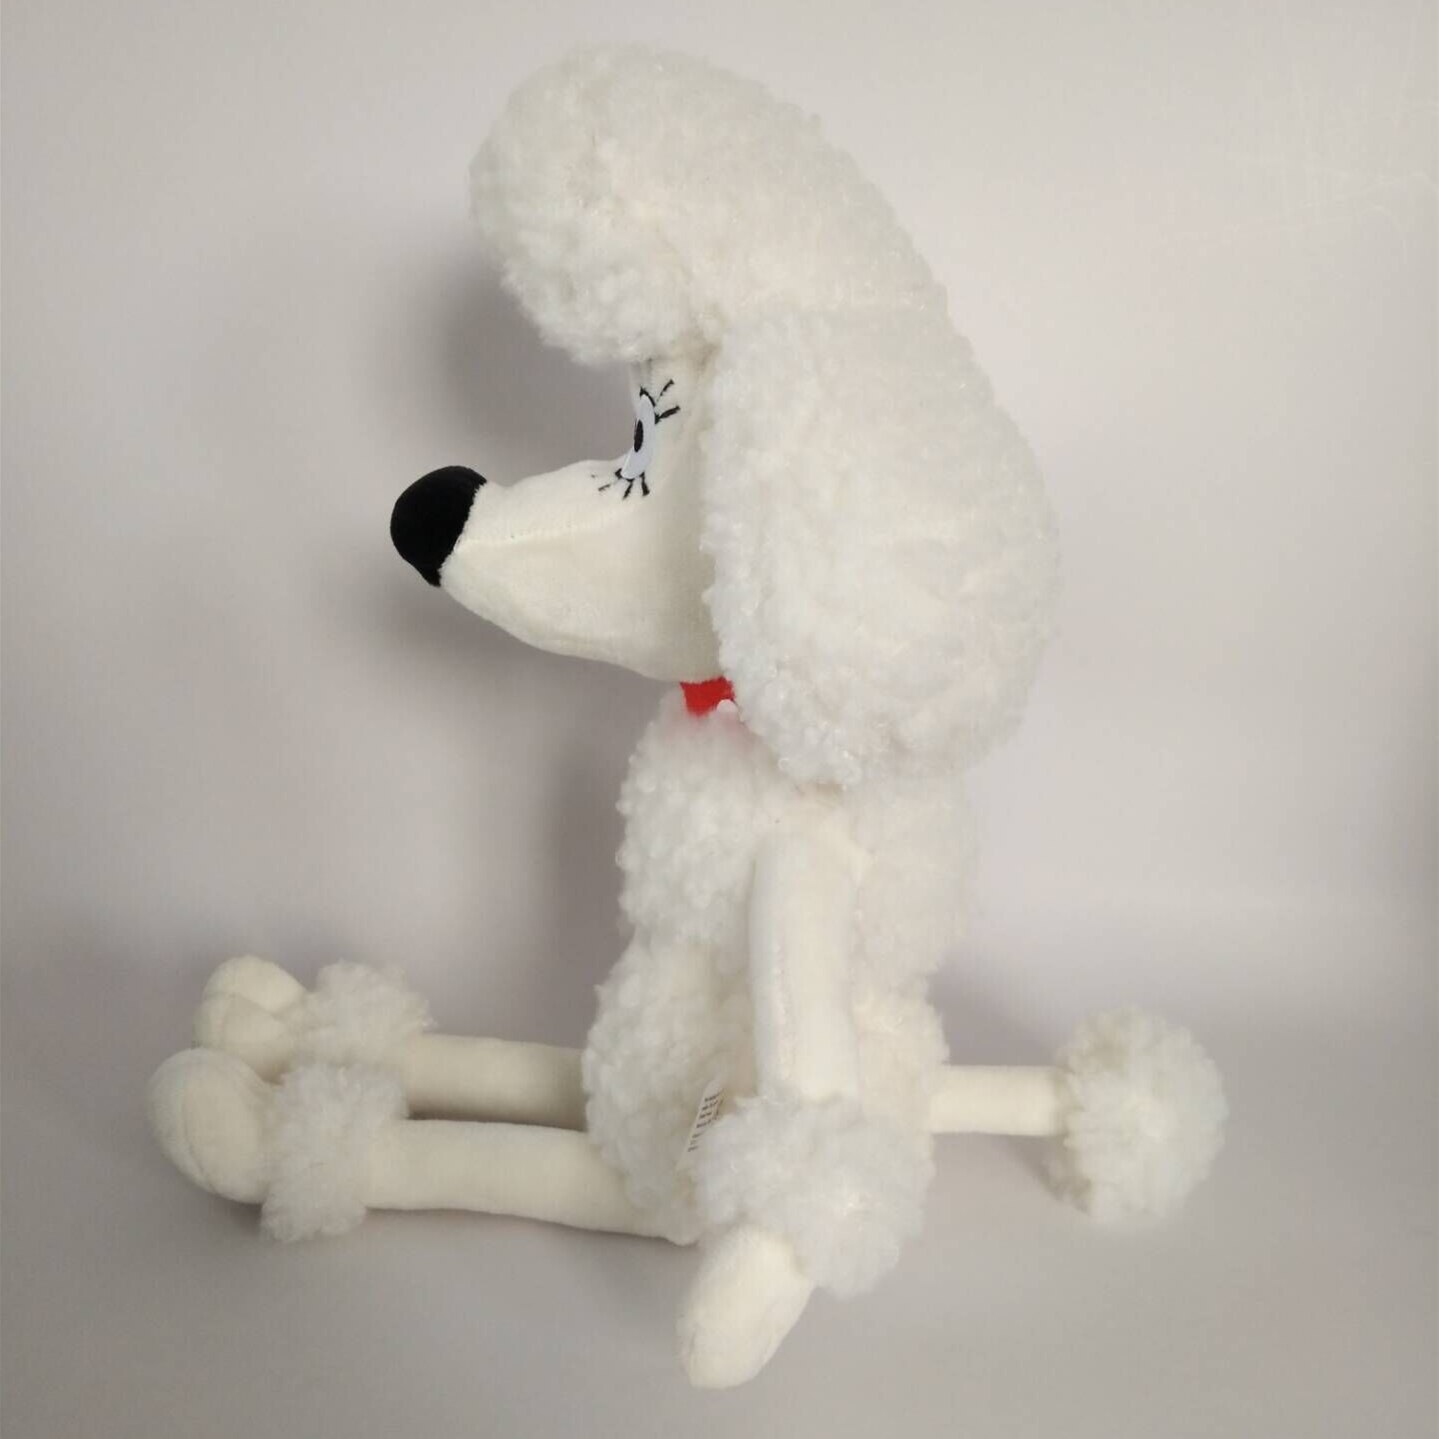 New Wallances Gromit Cute Love Section Fluffles Kawaii Anime Figure Poodle Plush Toys for Kids Doll Boy Girl Baby Gift